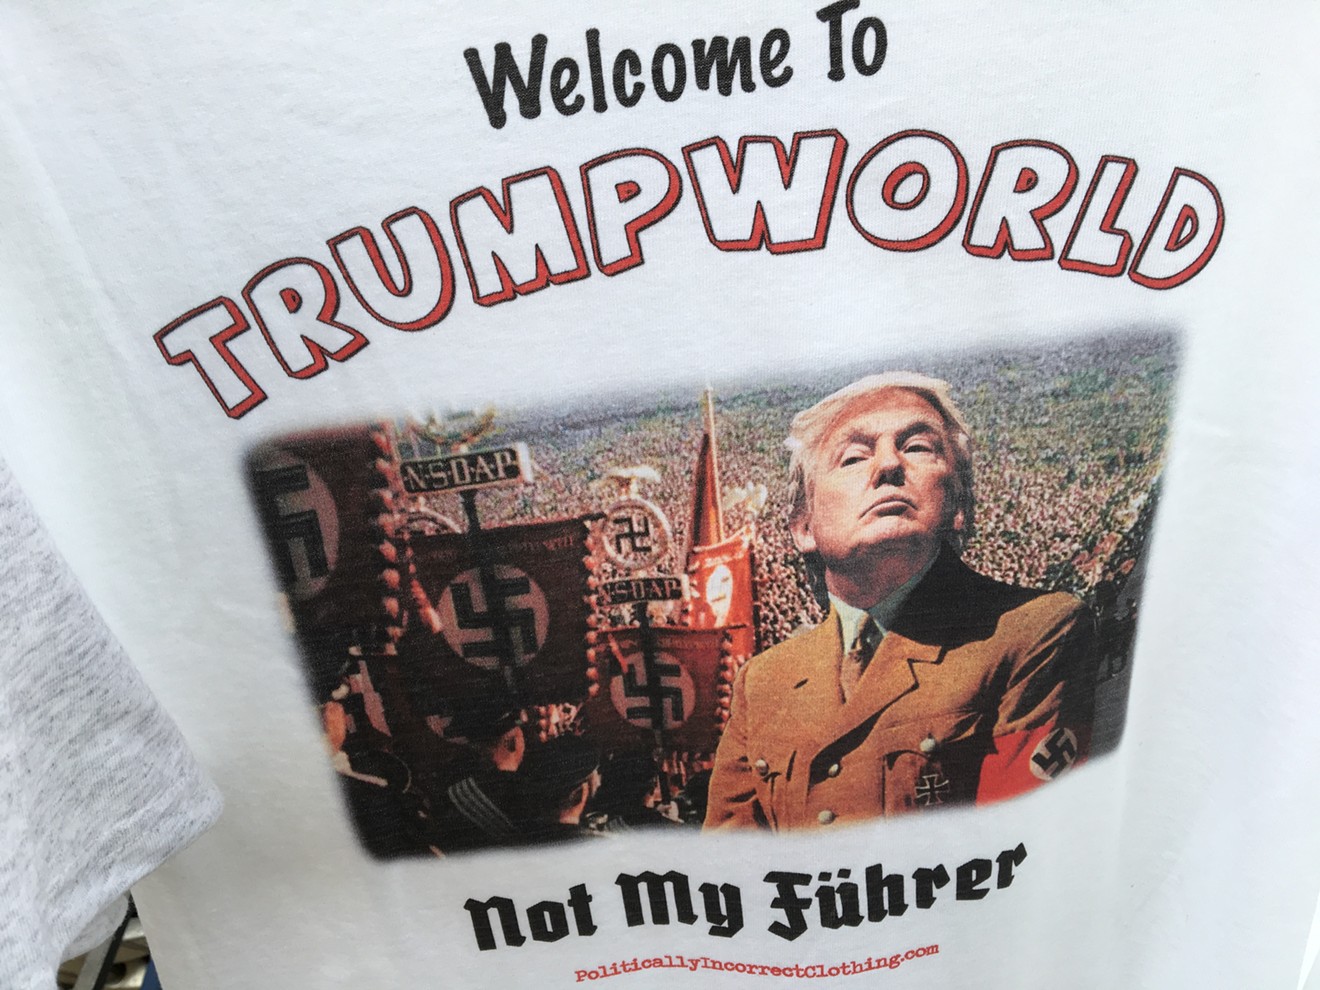 There are both pro- and anti-Trump shirts on sale, many designed to infuriate the other side.